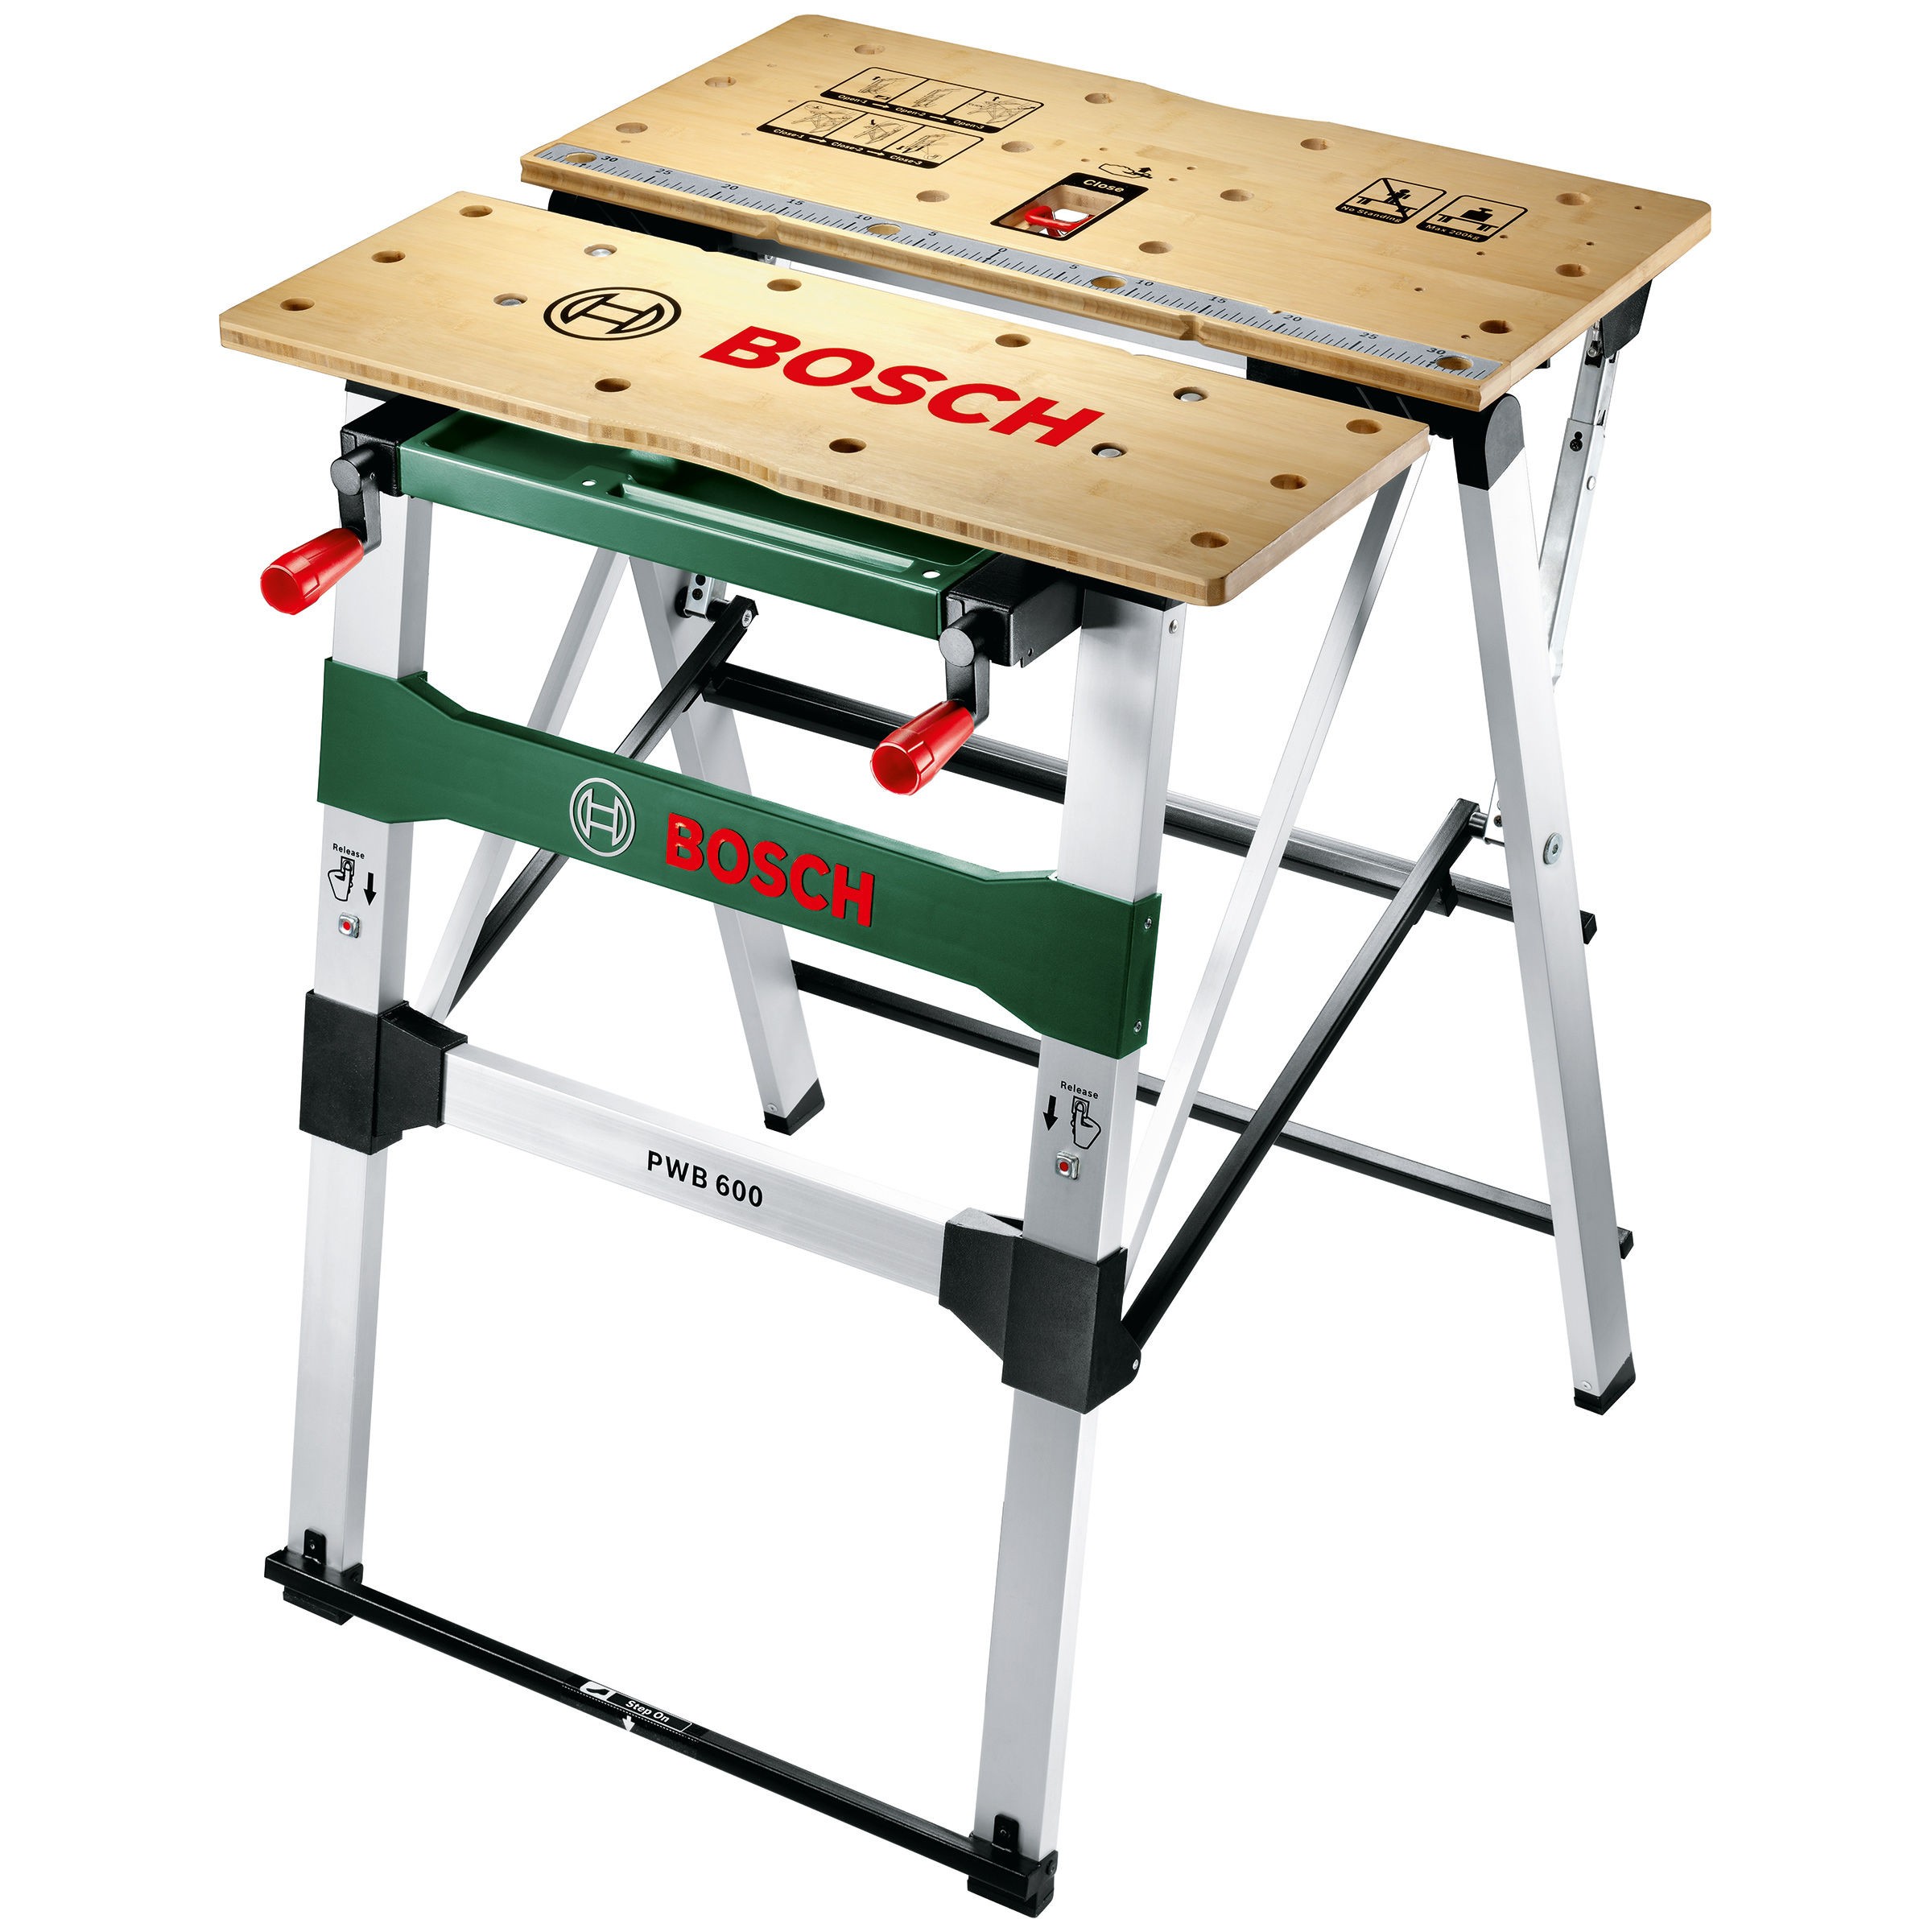 Review boschs portable work bench